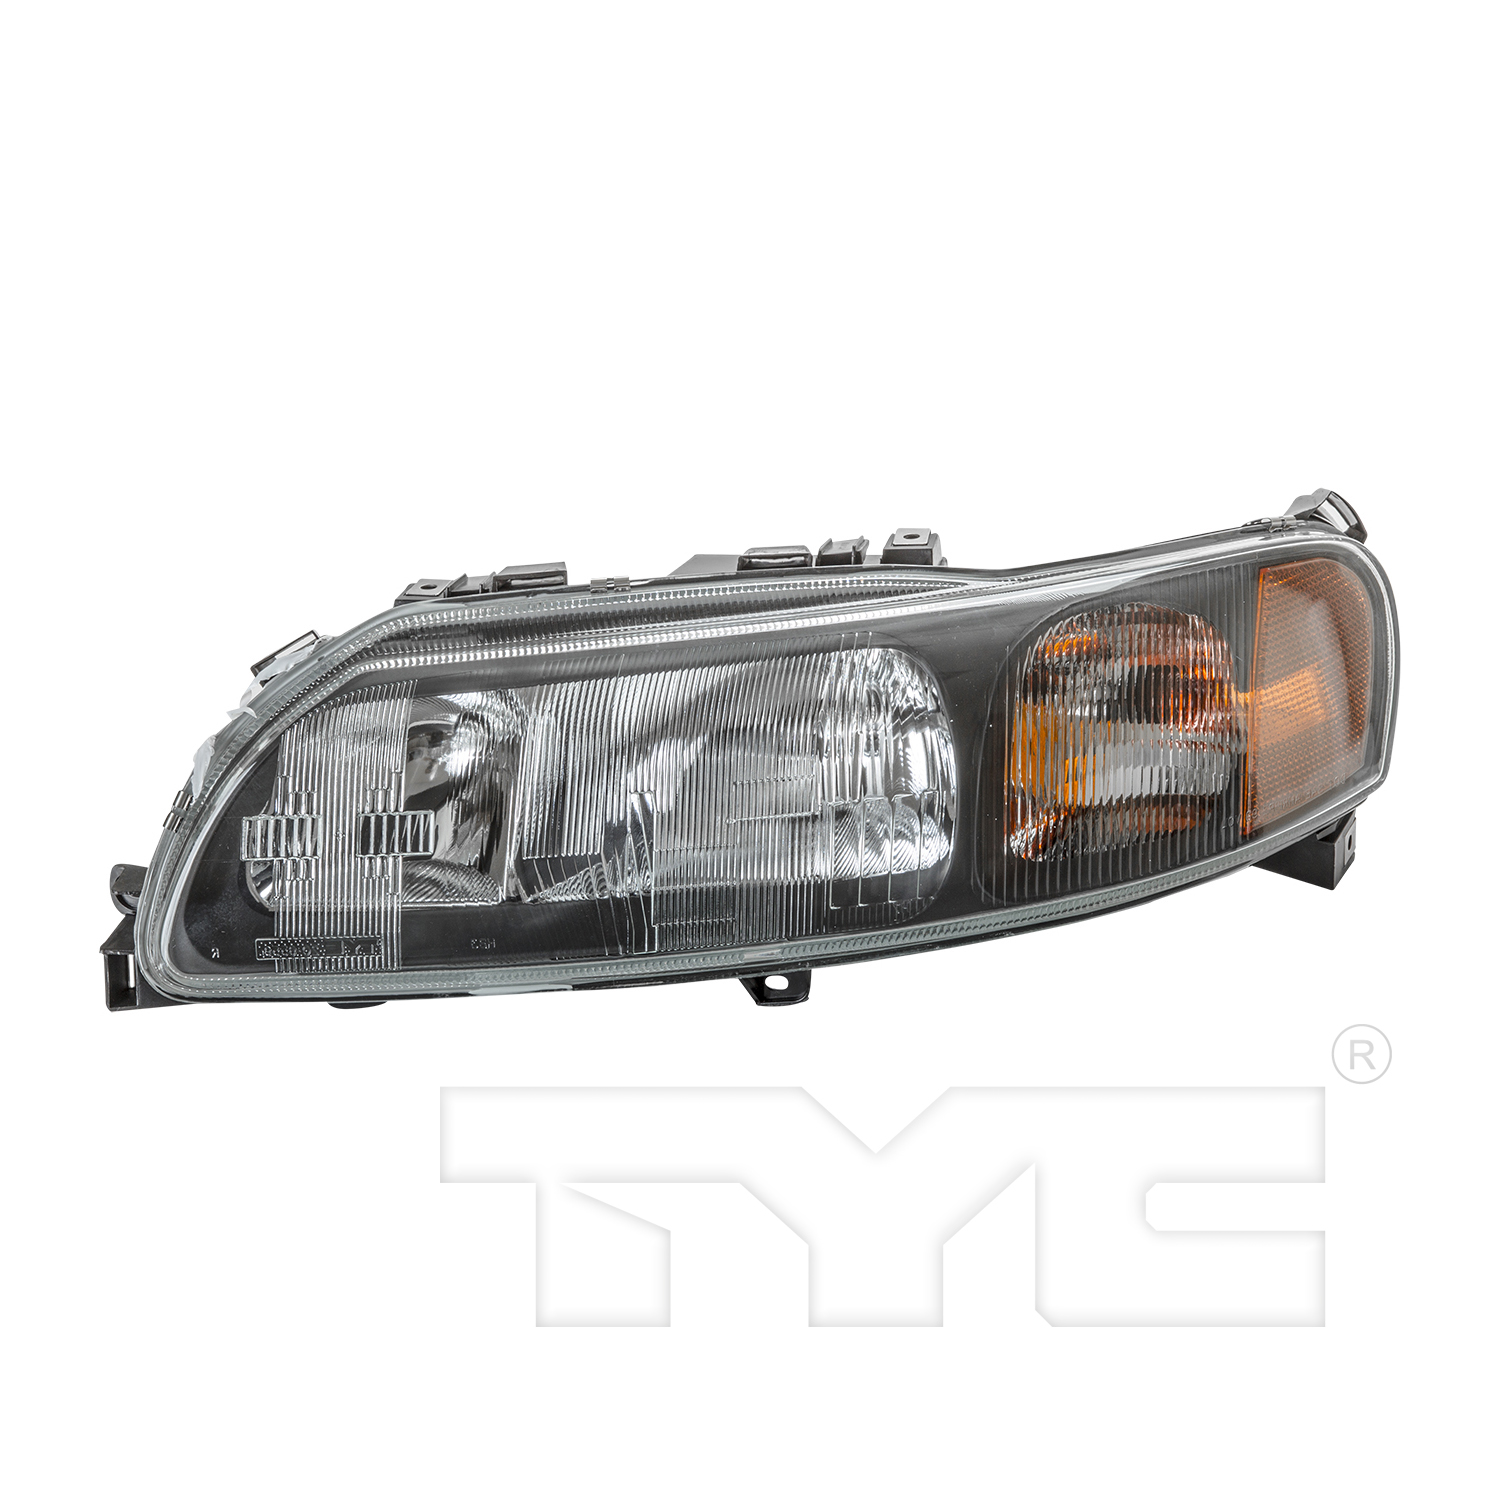 Aftermarket HEADLIGHTS for VOLVO - XC70, XC70,03-04,LT Headlamp assy composite